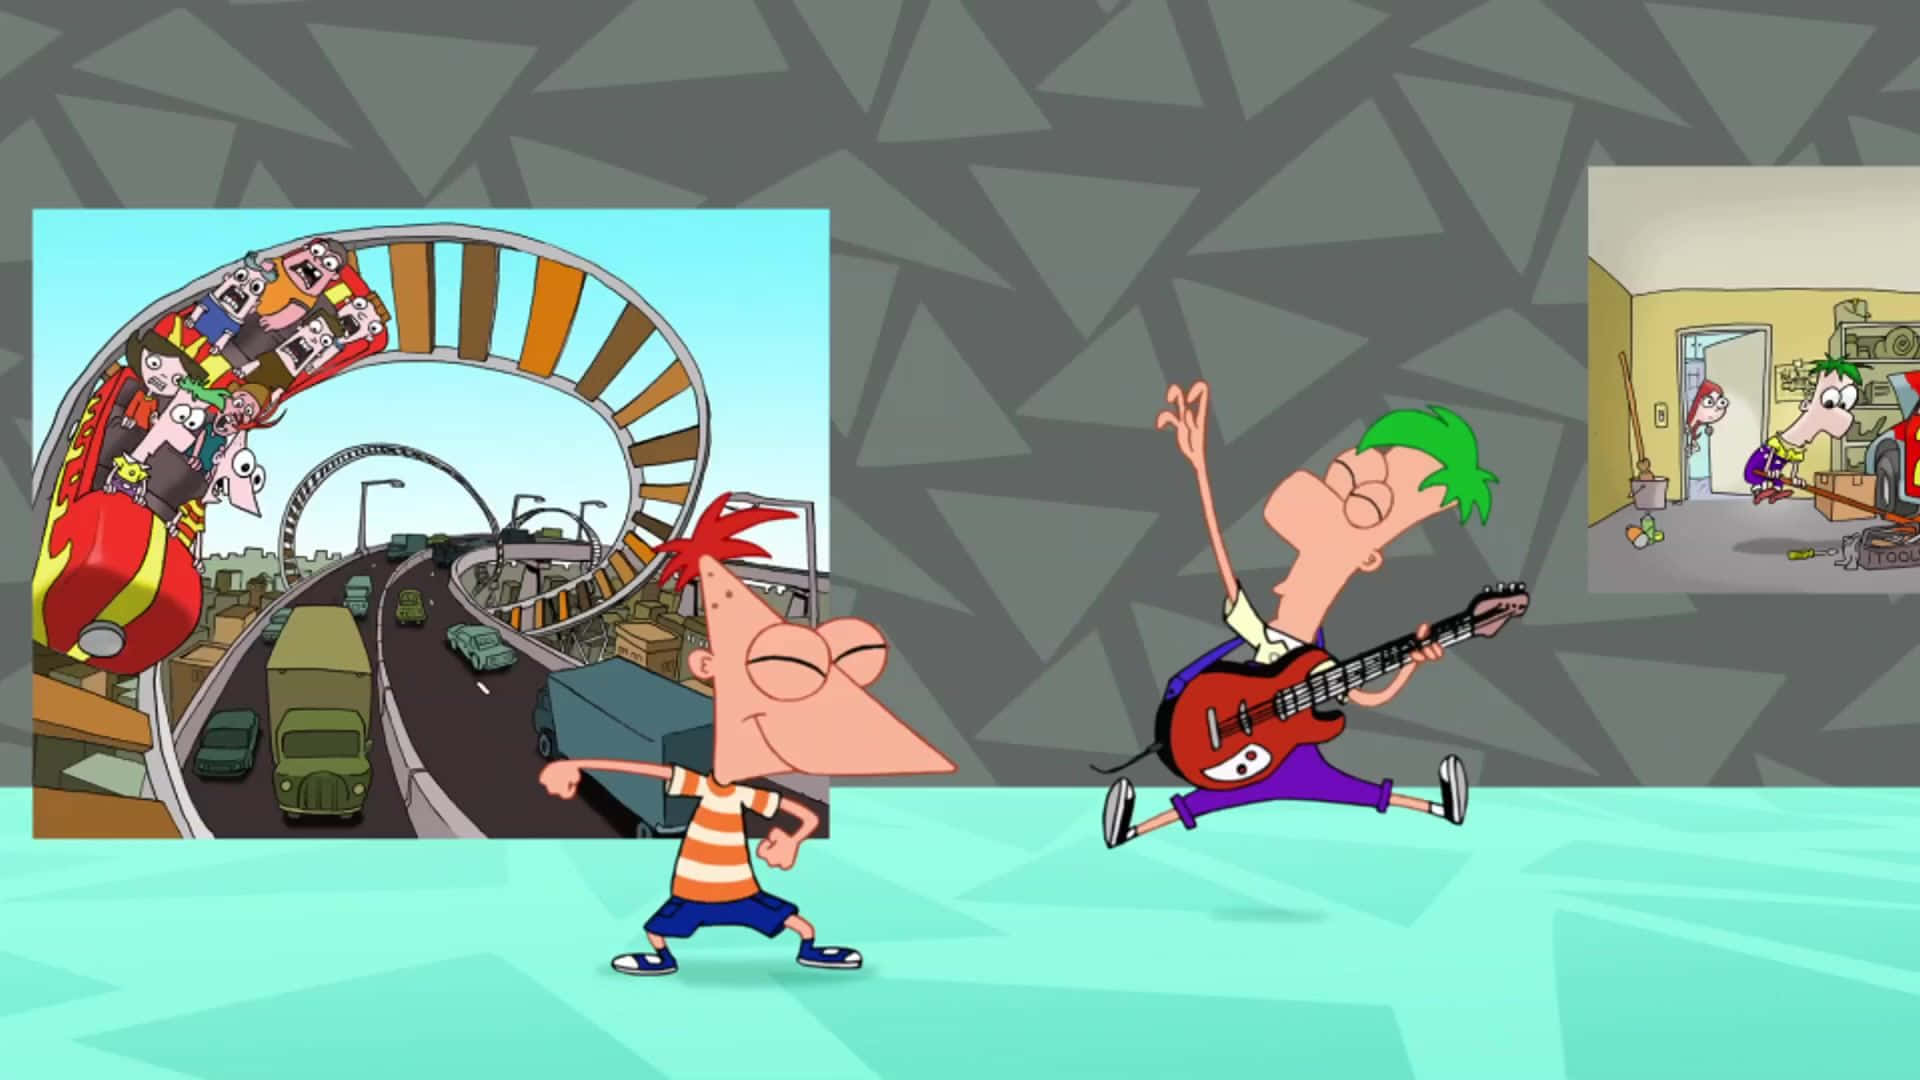 Phineas and Ferb enjoying a fun-filled day in their imaginative world